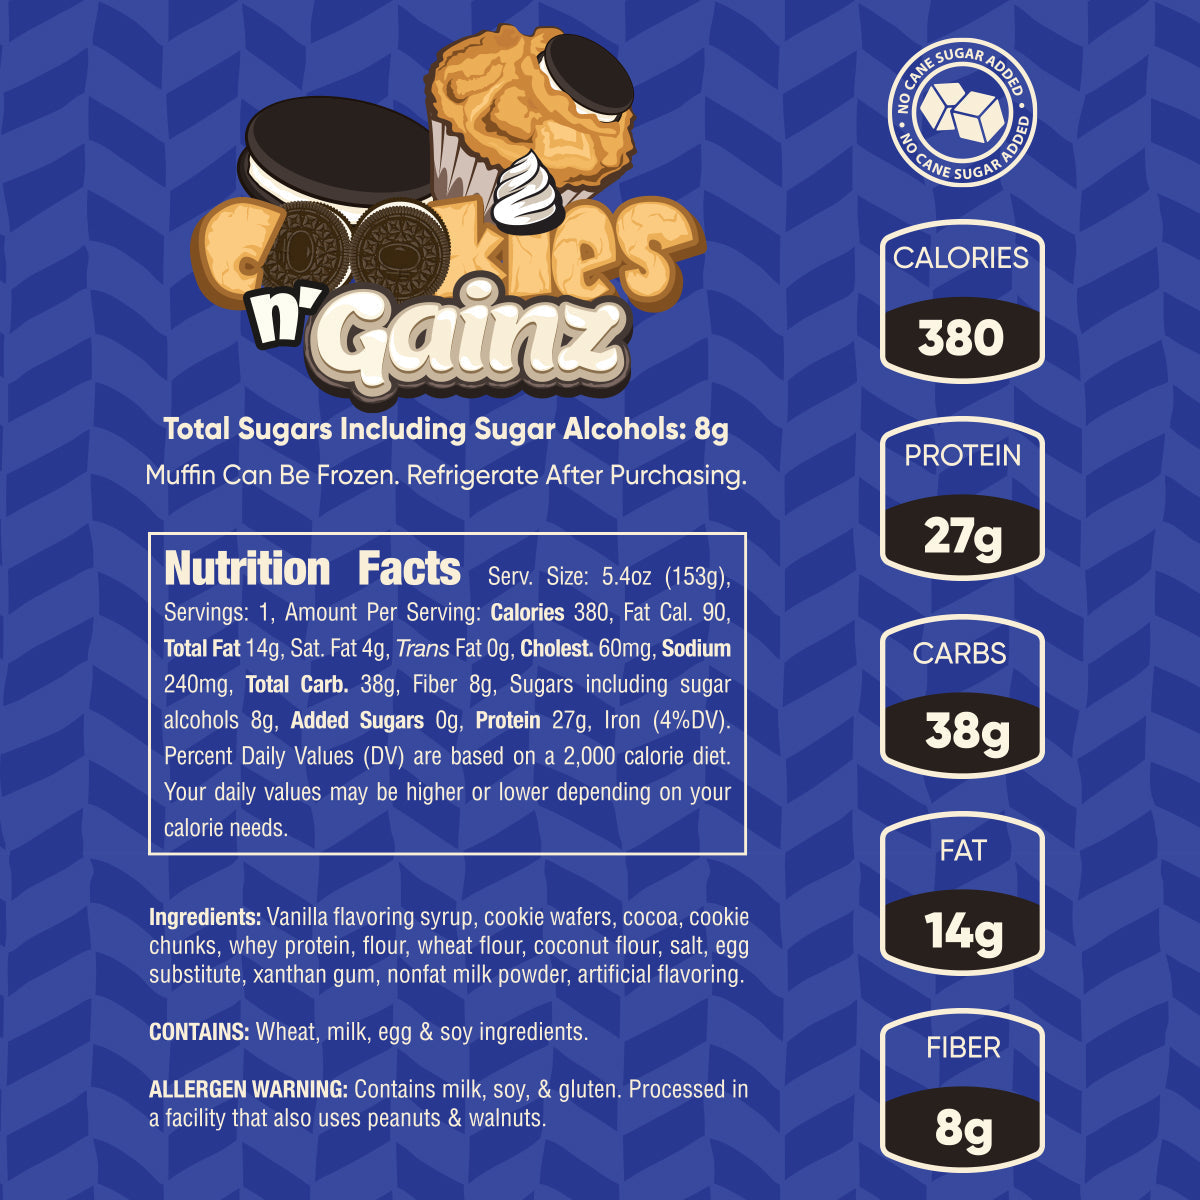 cookies n gains muffin nutrition facts